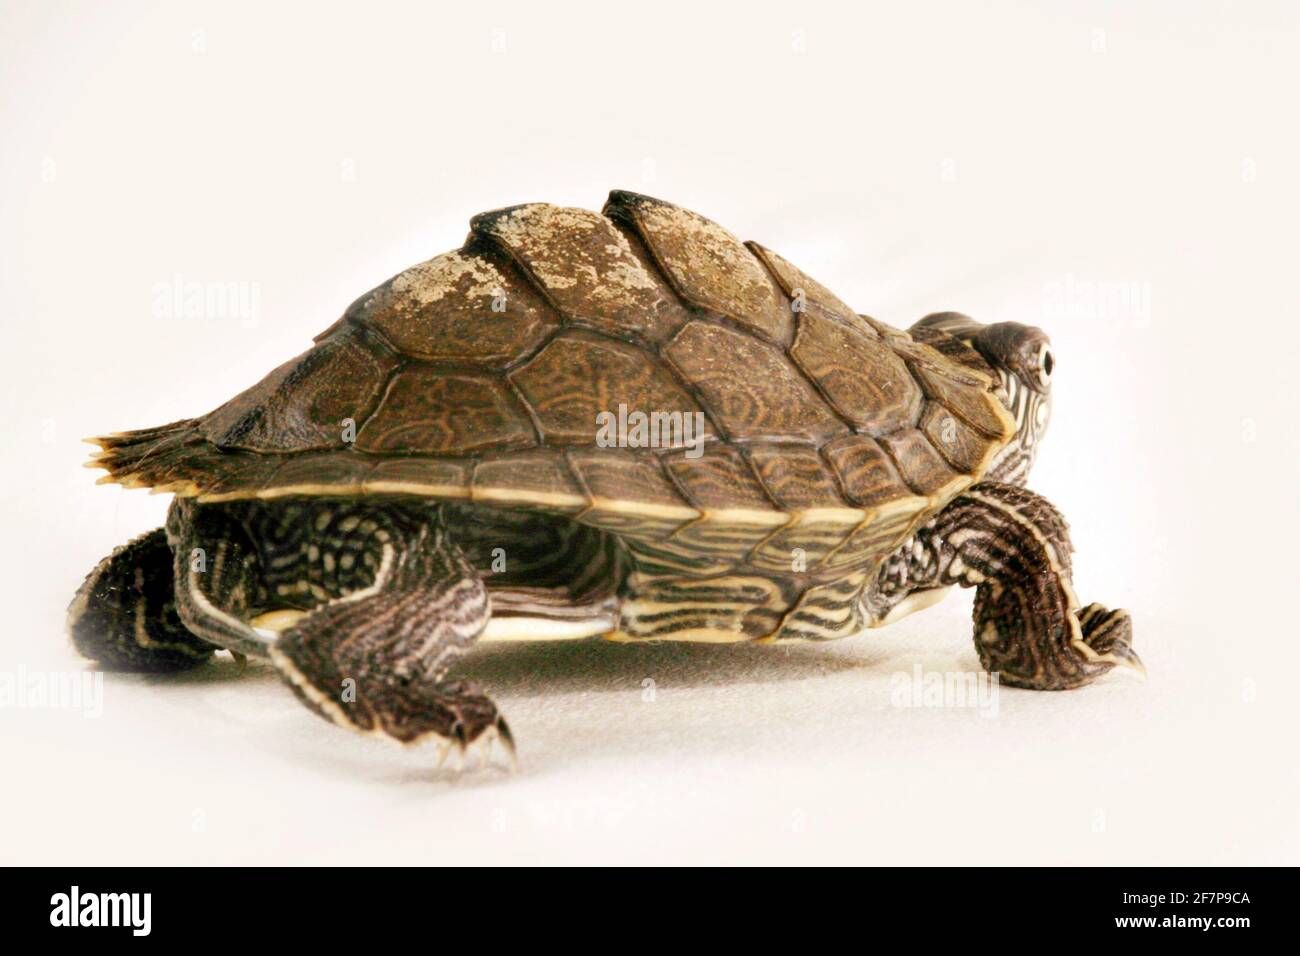 Mississippi map turtle (Graptemys kohnii), side view, cut-out Stock Photo